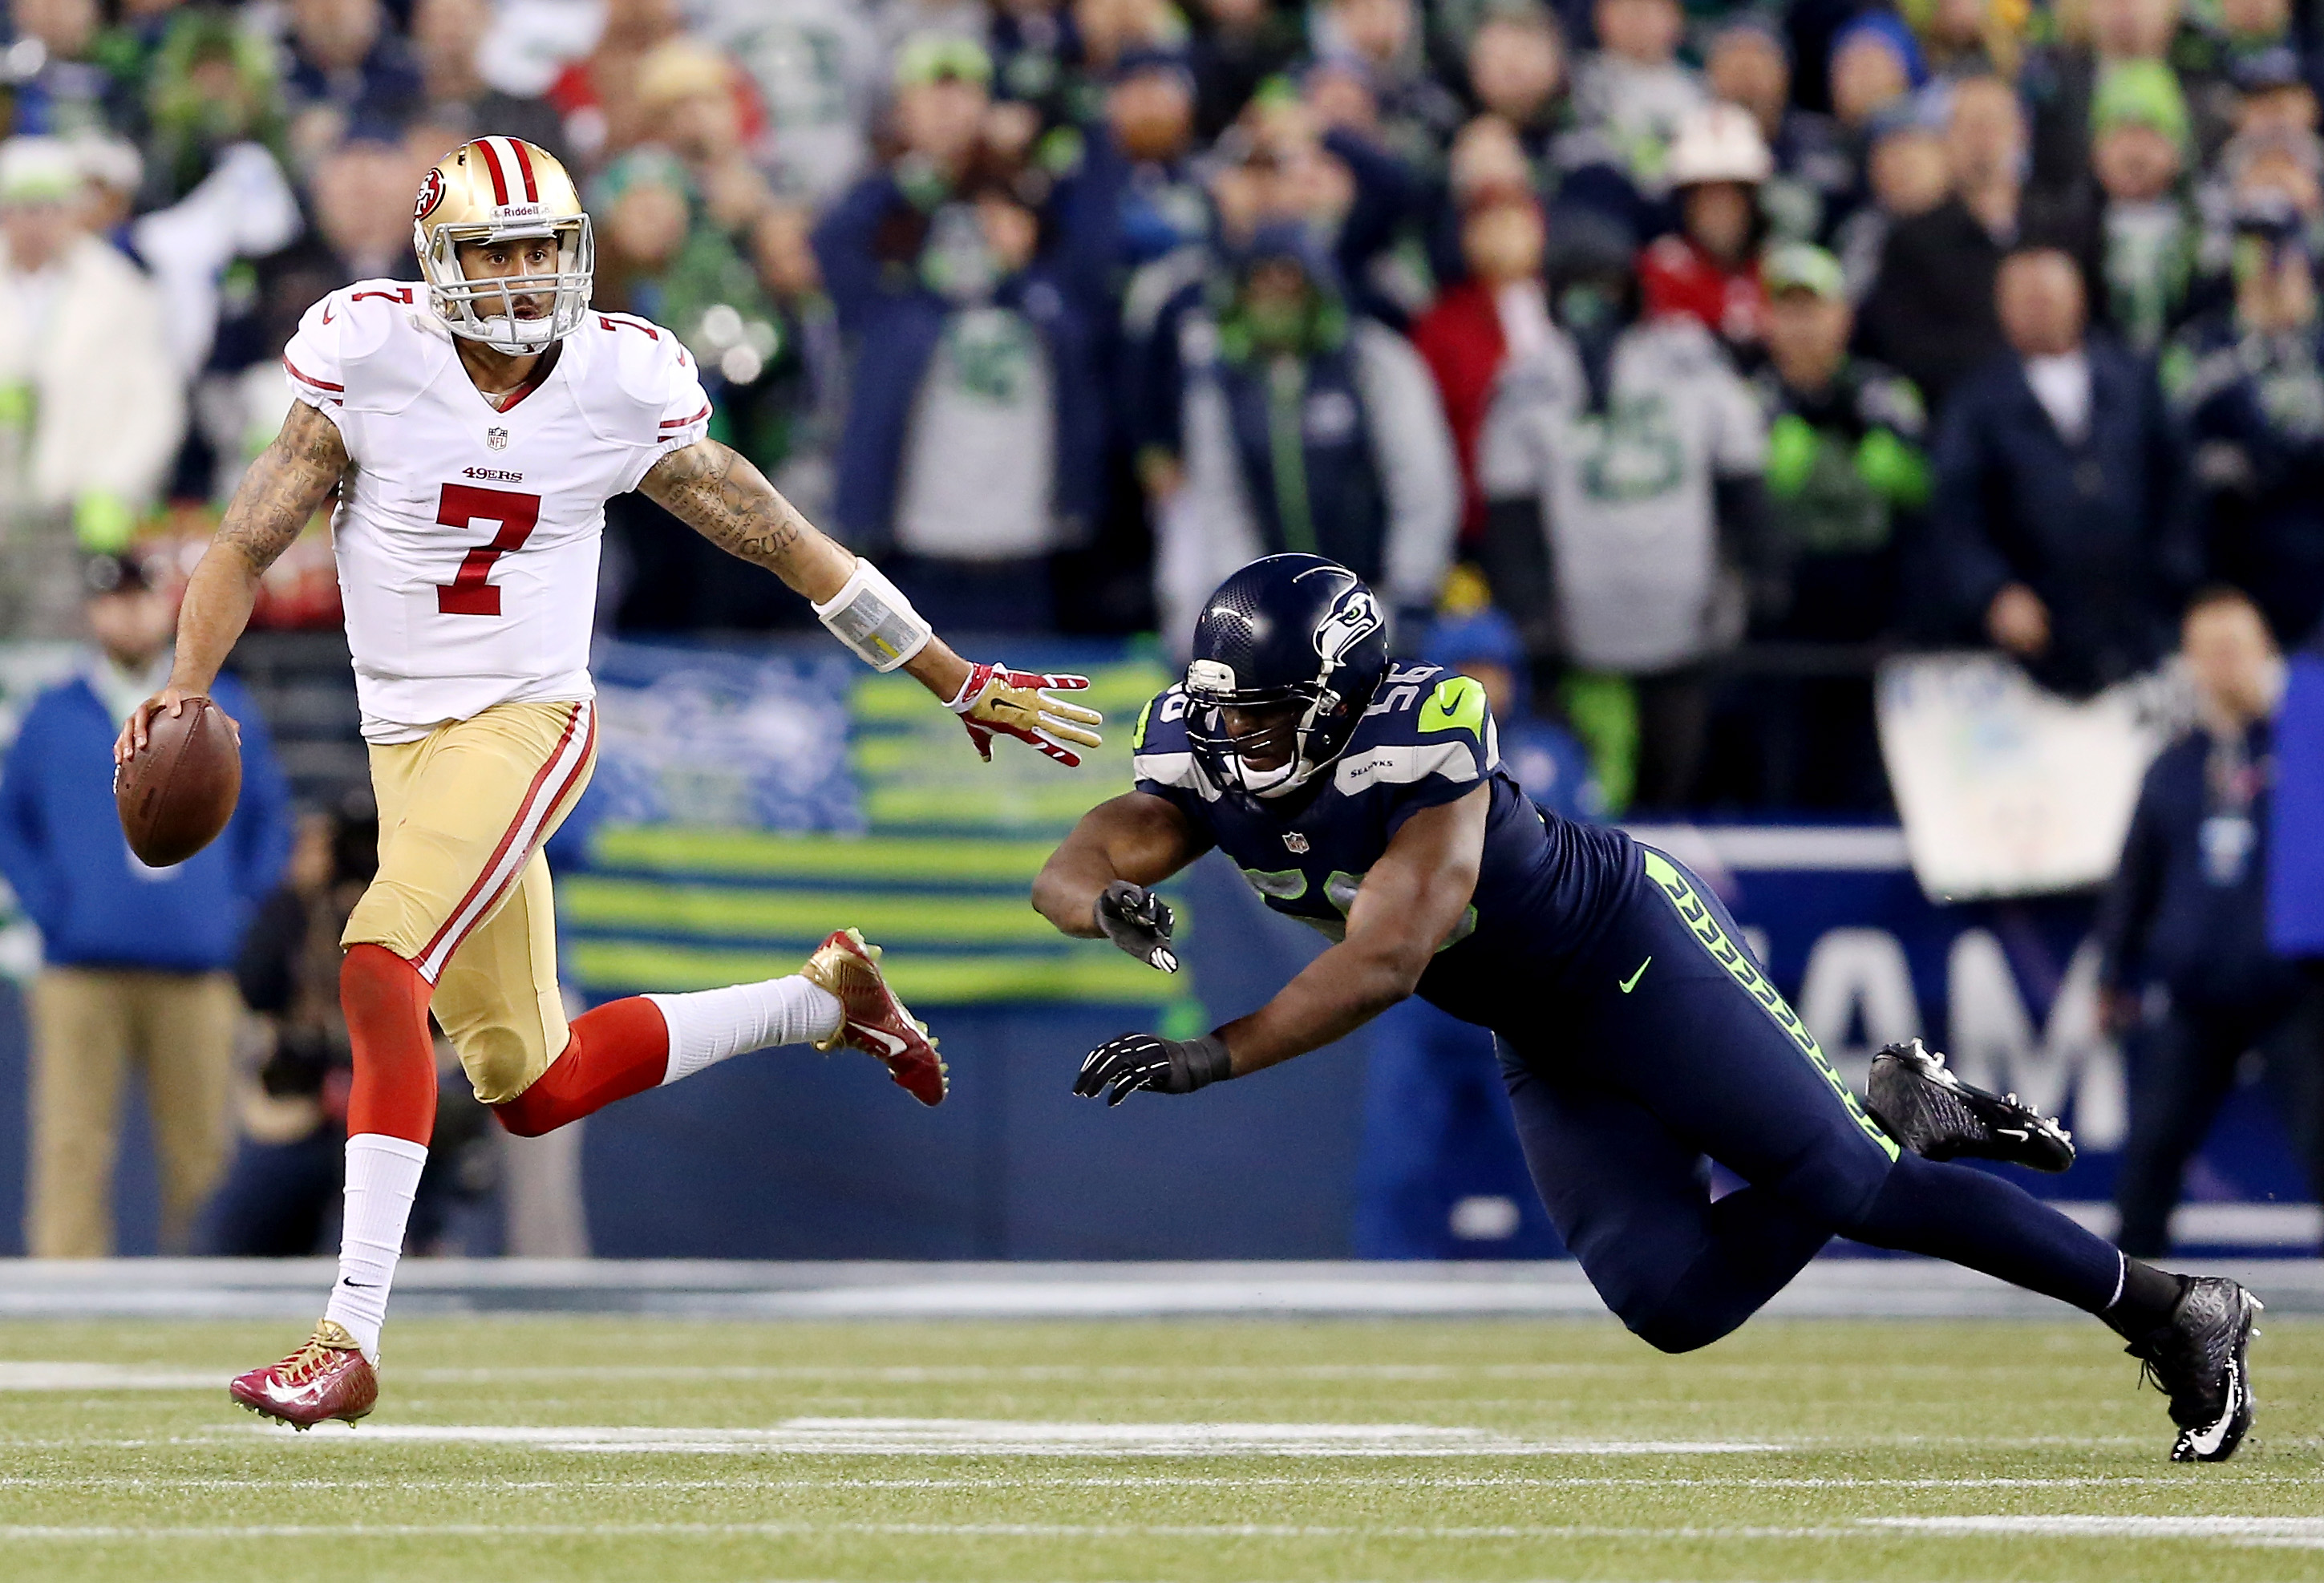 How to Watch Seahawks vs. 49ers Live Stream Online